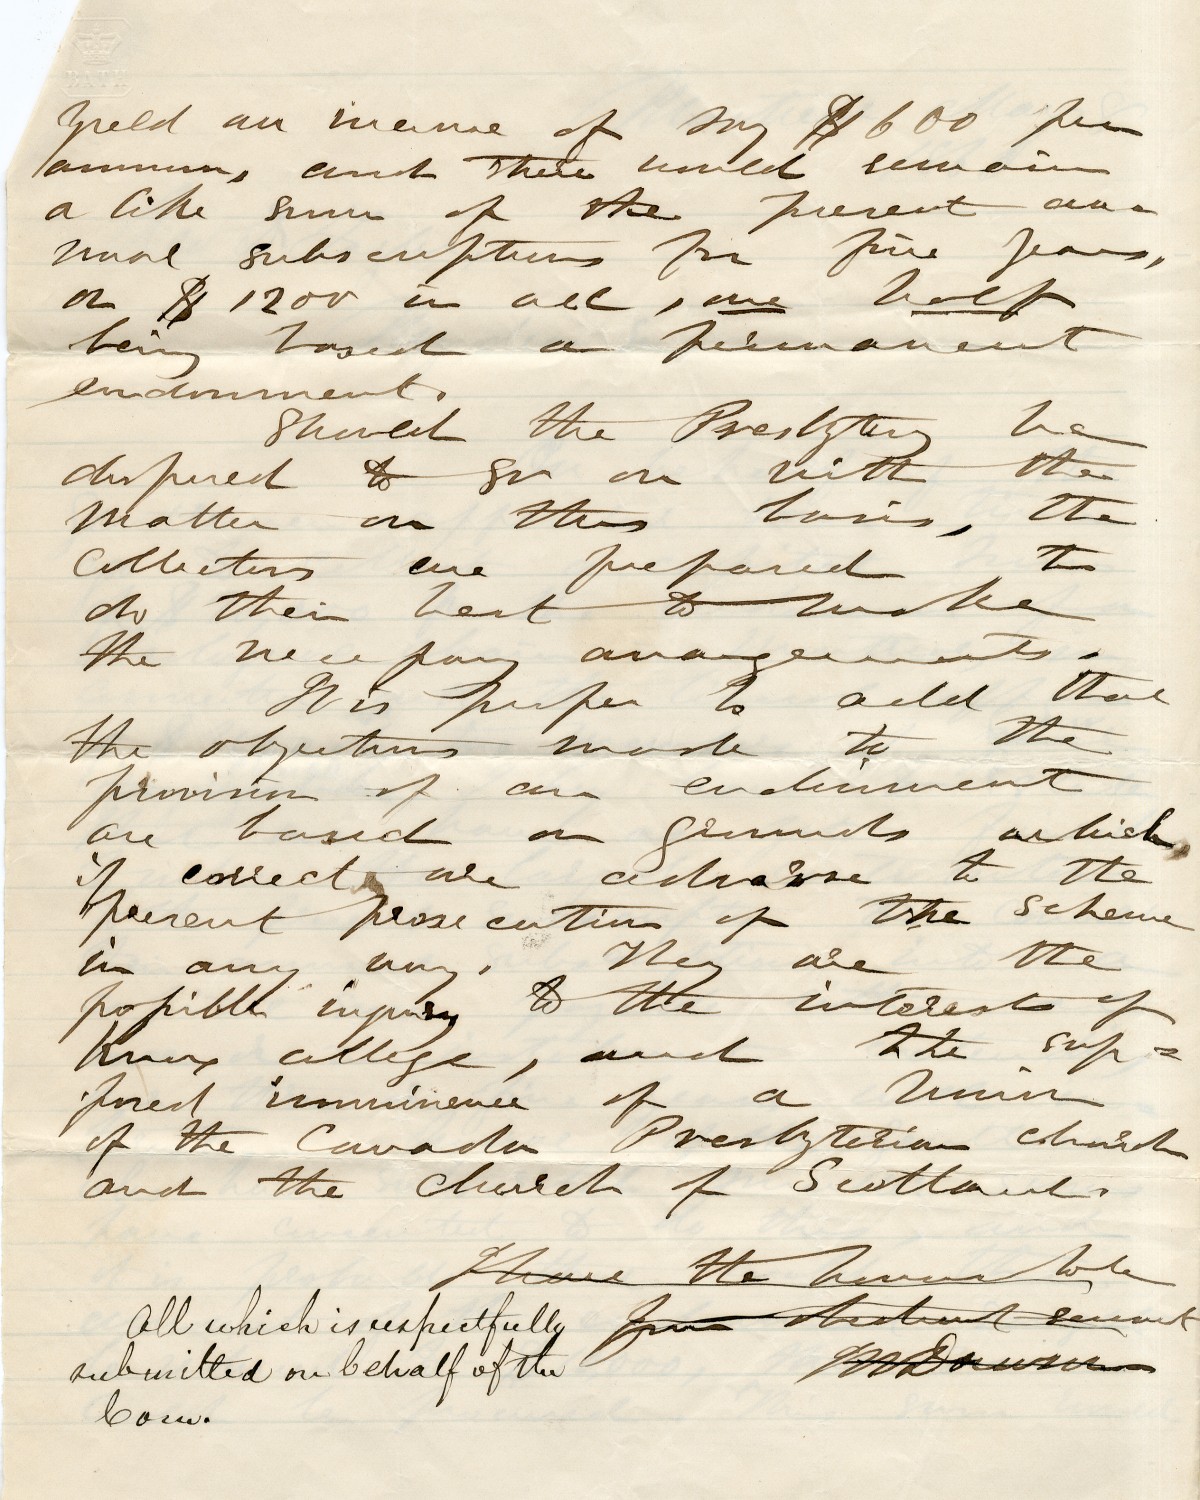 Notes relating to the opening of the College, and the funds required to operate it